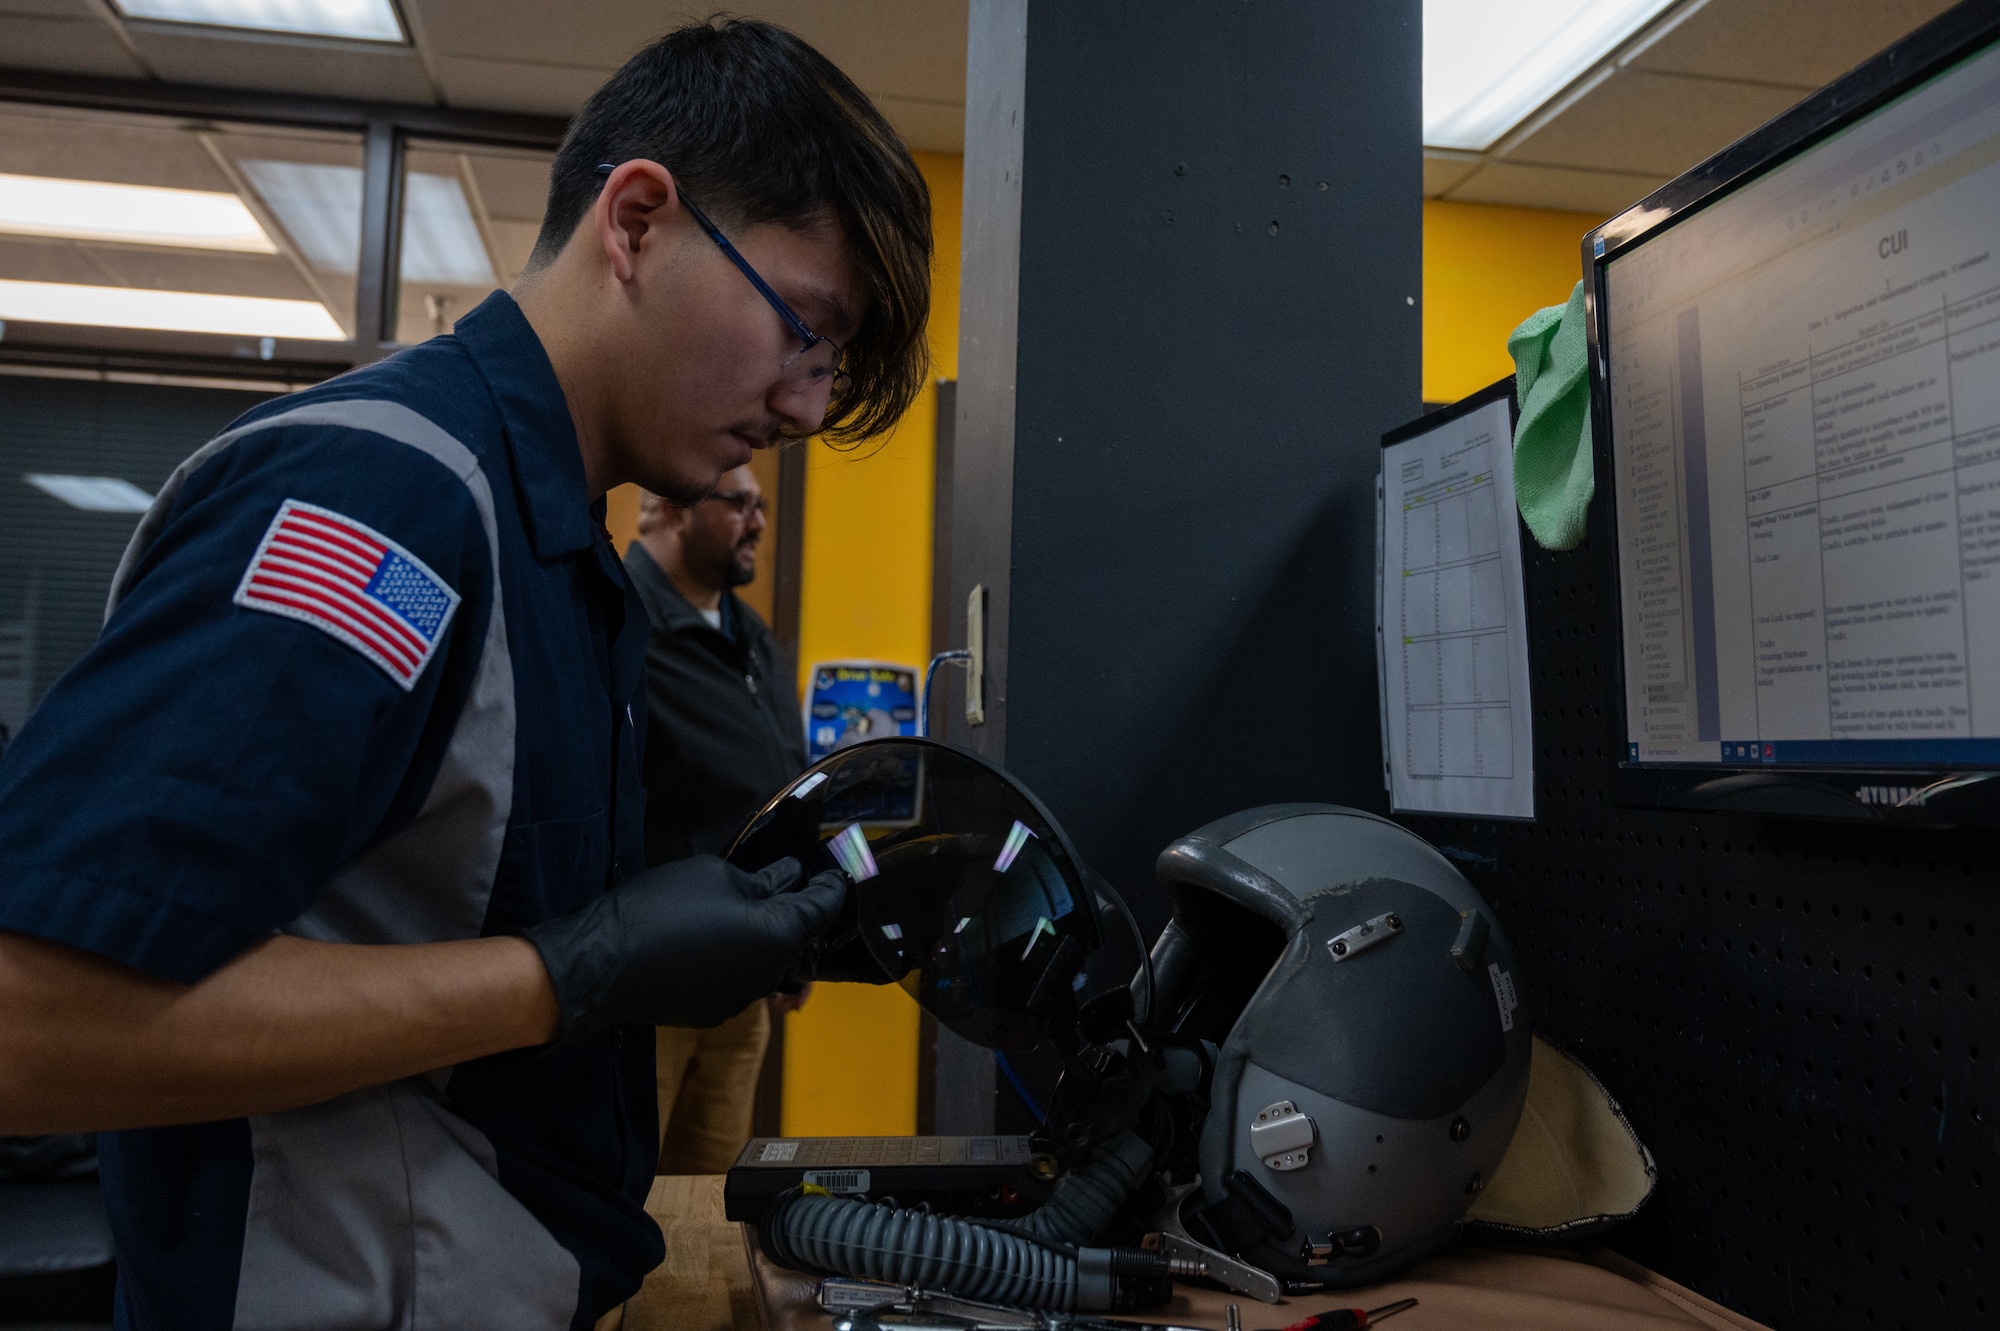 Alonzo Narvaez, a CTE Program Student, restores flight equipment and inspects it before its subsequent use on Jan. 30, 2023, at Laughlin Air Force Base, Texas. Members of the local grow our own program get the opportunity to work in various workstations on base. (U.S. Air Force photo by Senior Airman David Phaff)